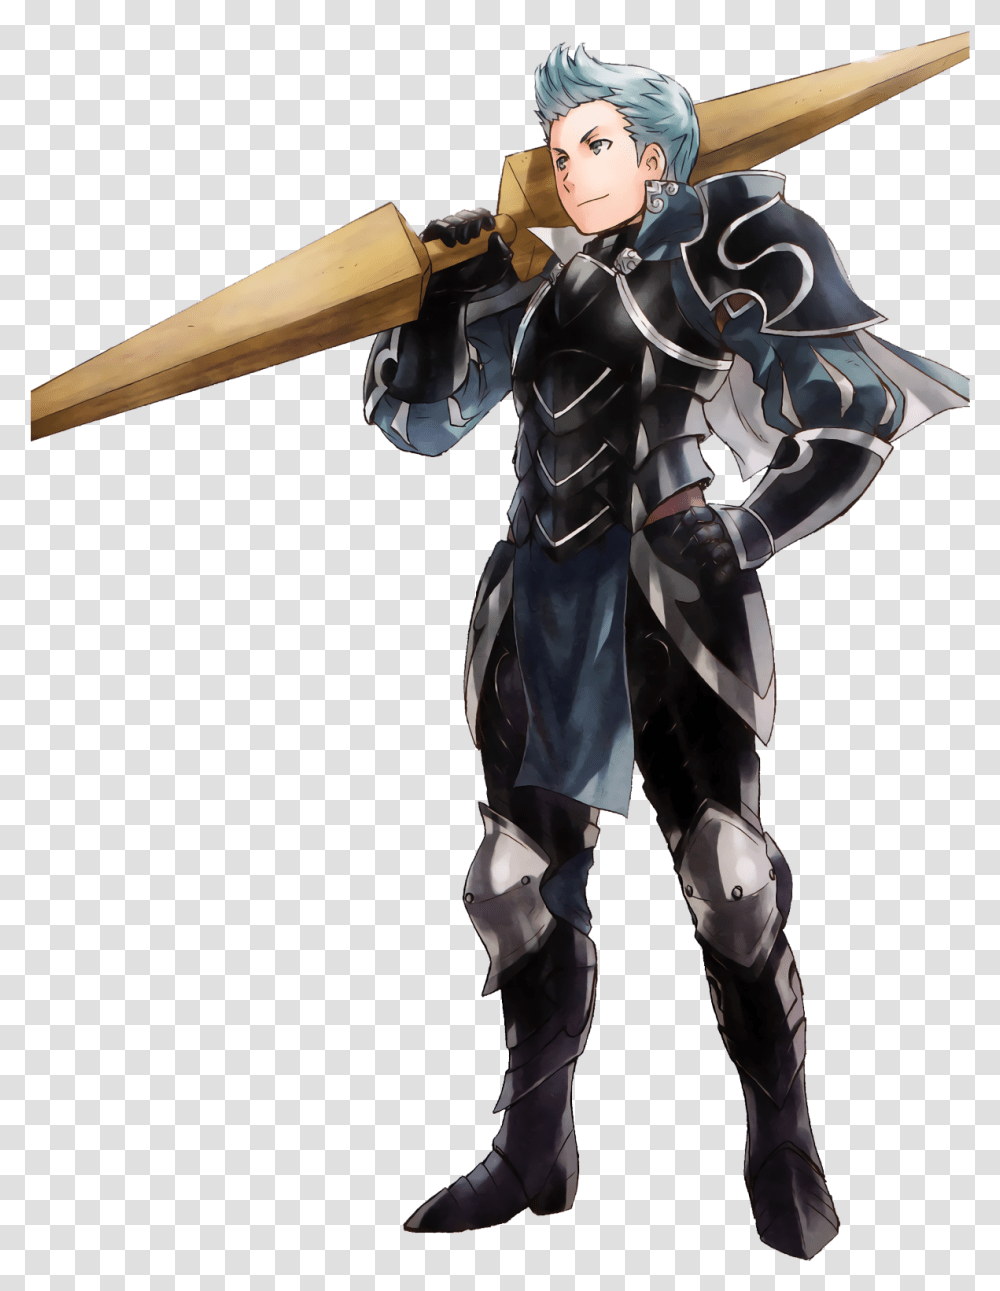 Silas Fire Emblem Wiki Fire Emblem Fates, Person, Knight, People, Costume Transparent Png